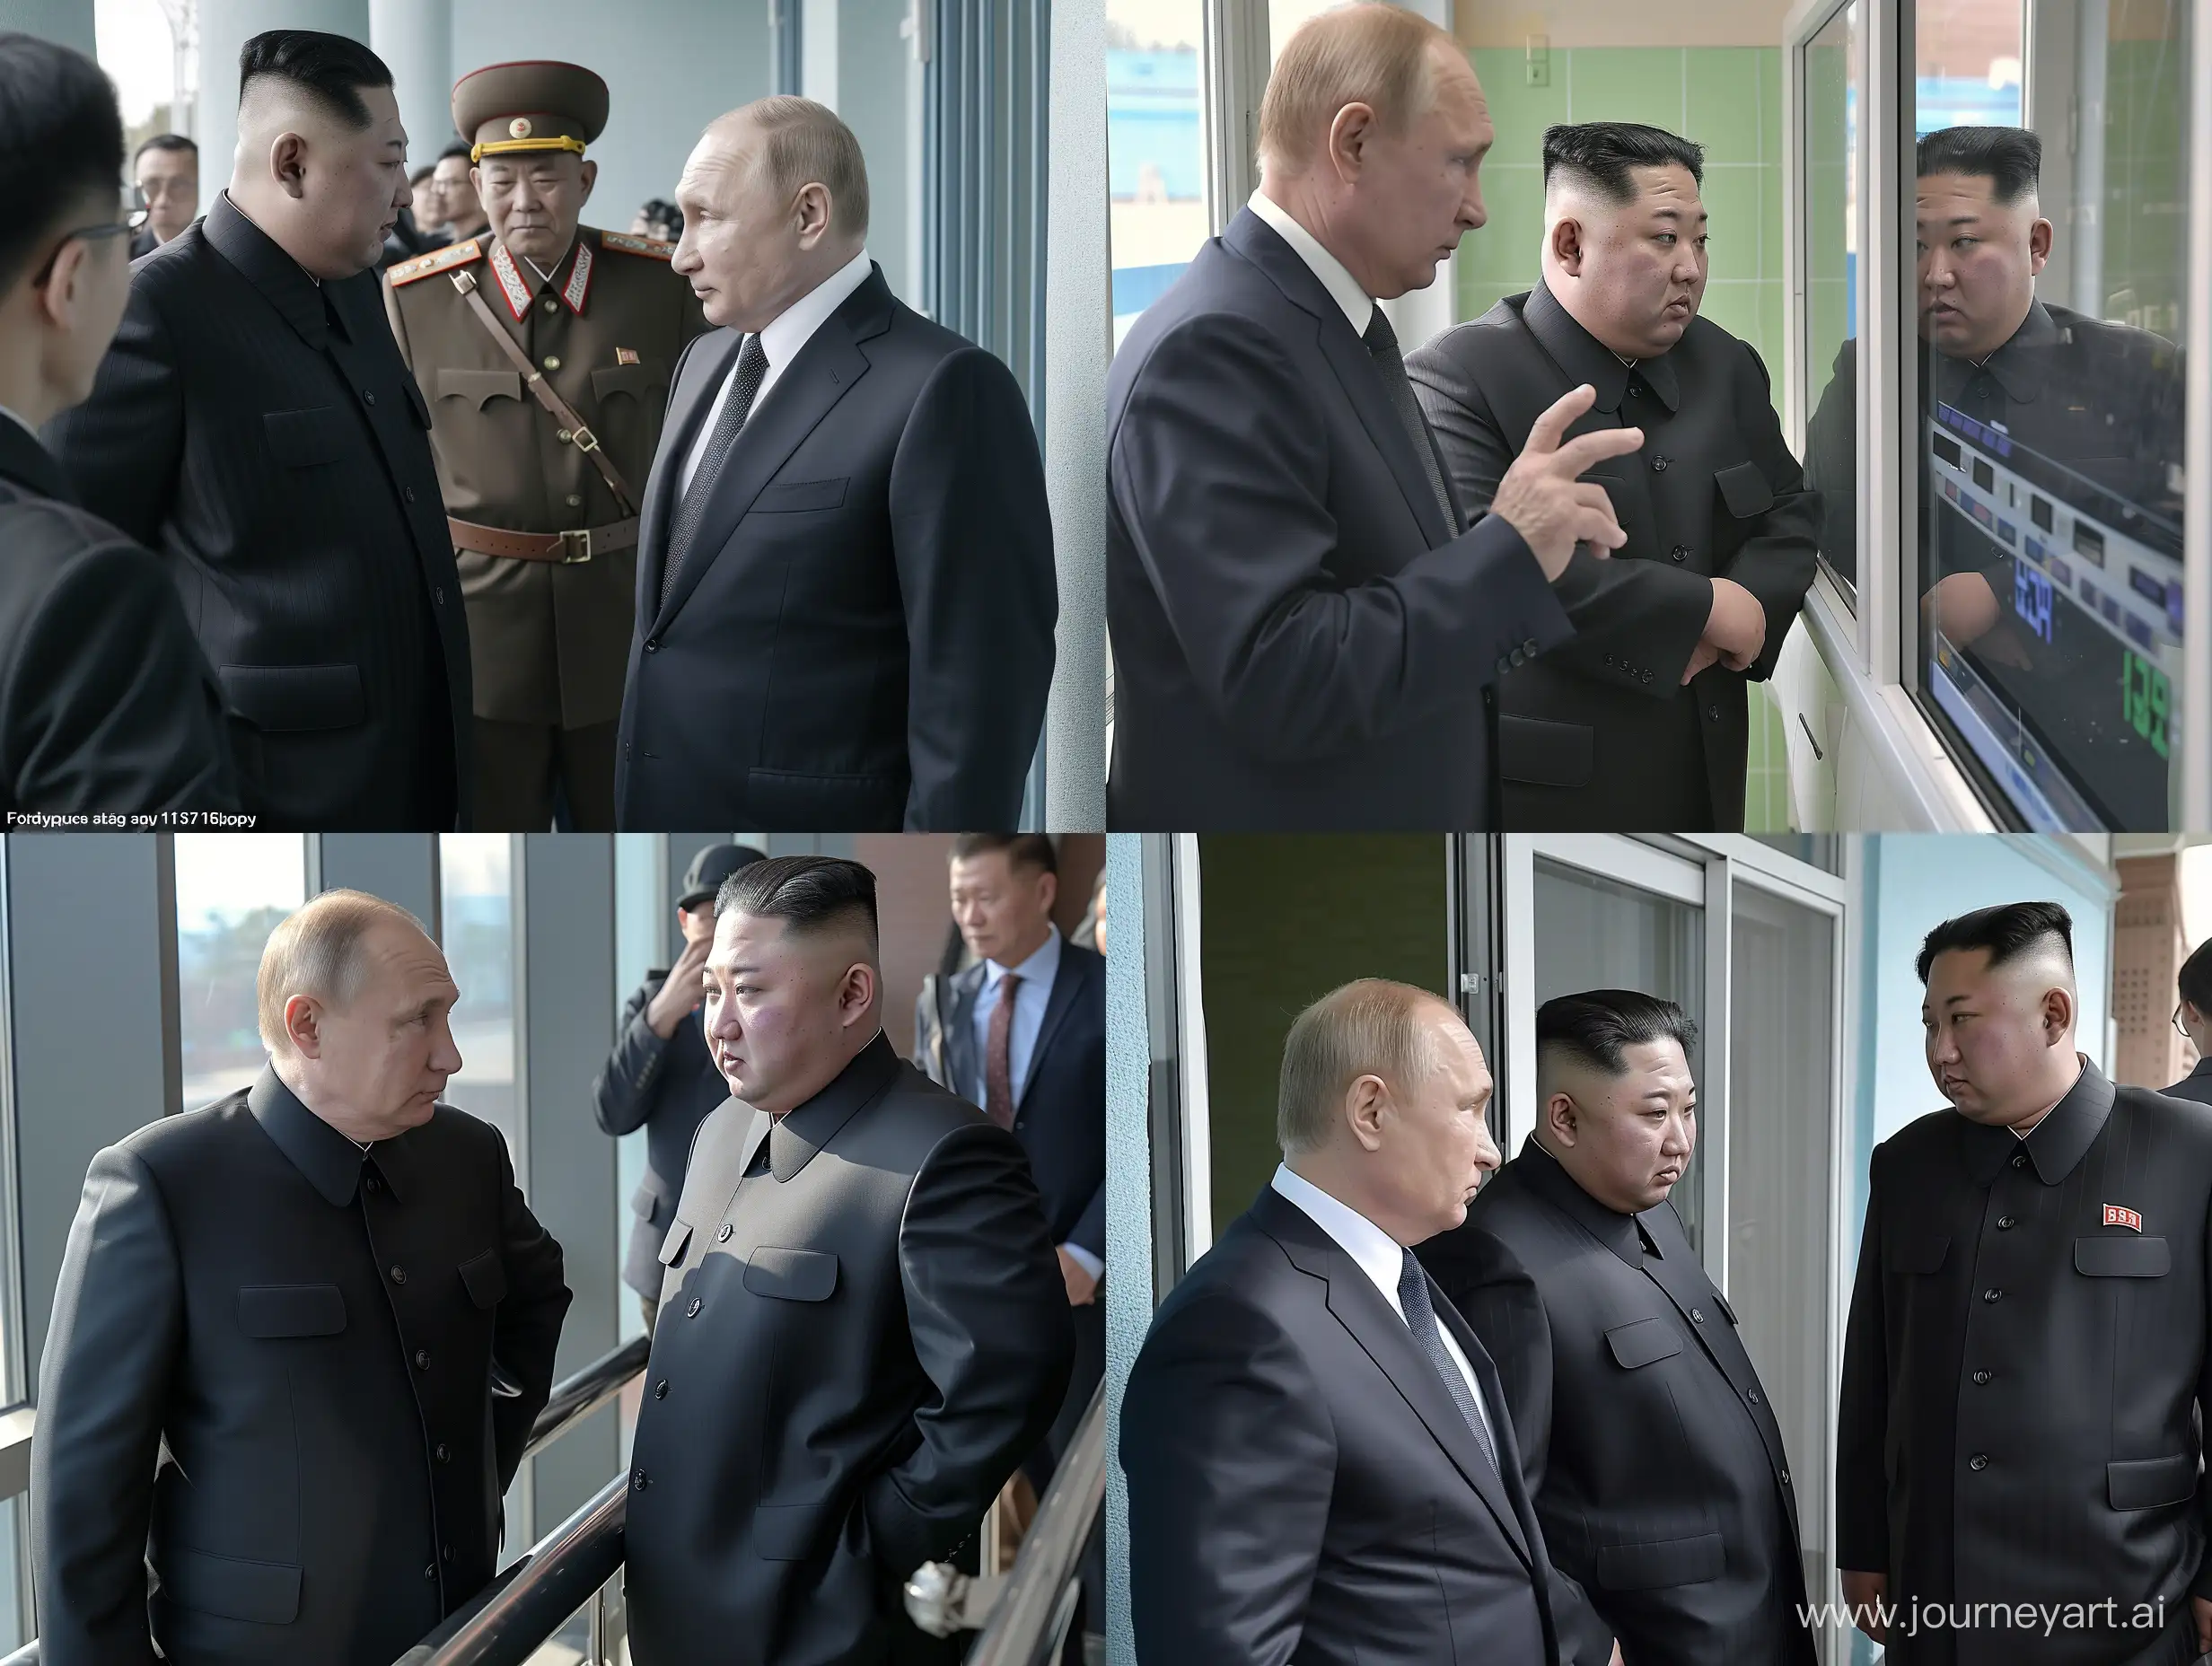 Putin-and-Kim-Jong-Un-Inspecting-Weapons-Indoors-in-Daylight